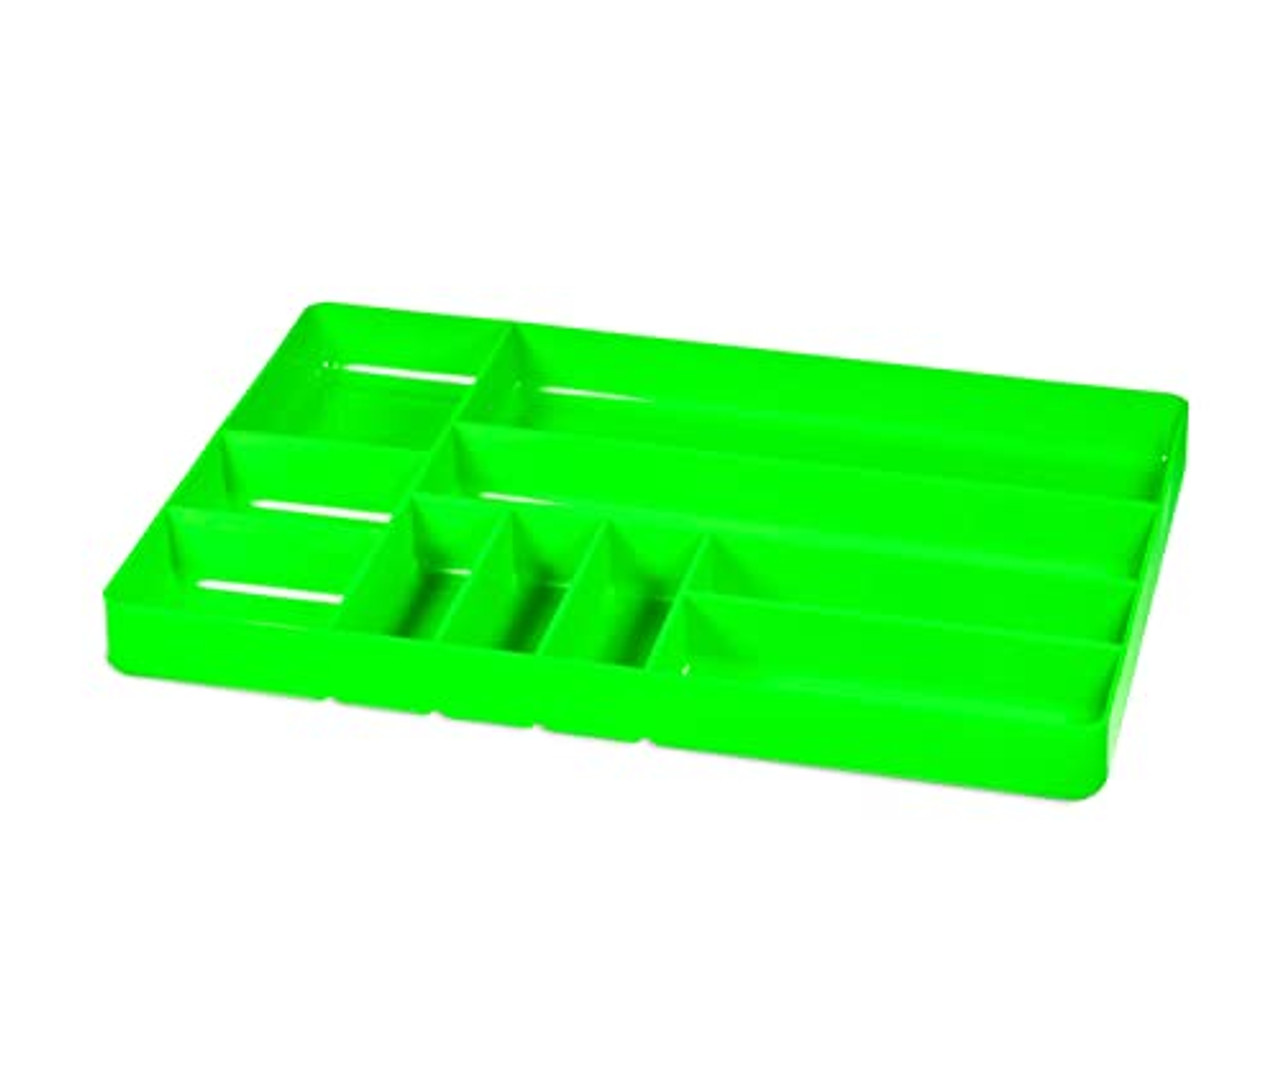 Ernst 5024 10.5 x 10.5 3 Compartment Tool Organizer Tray - Green